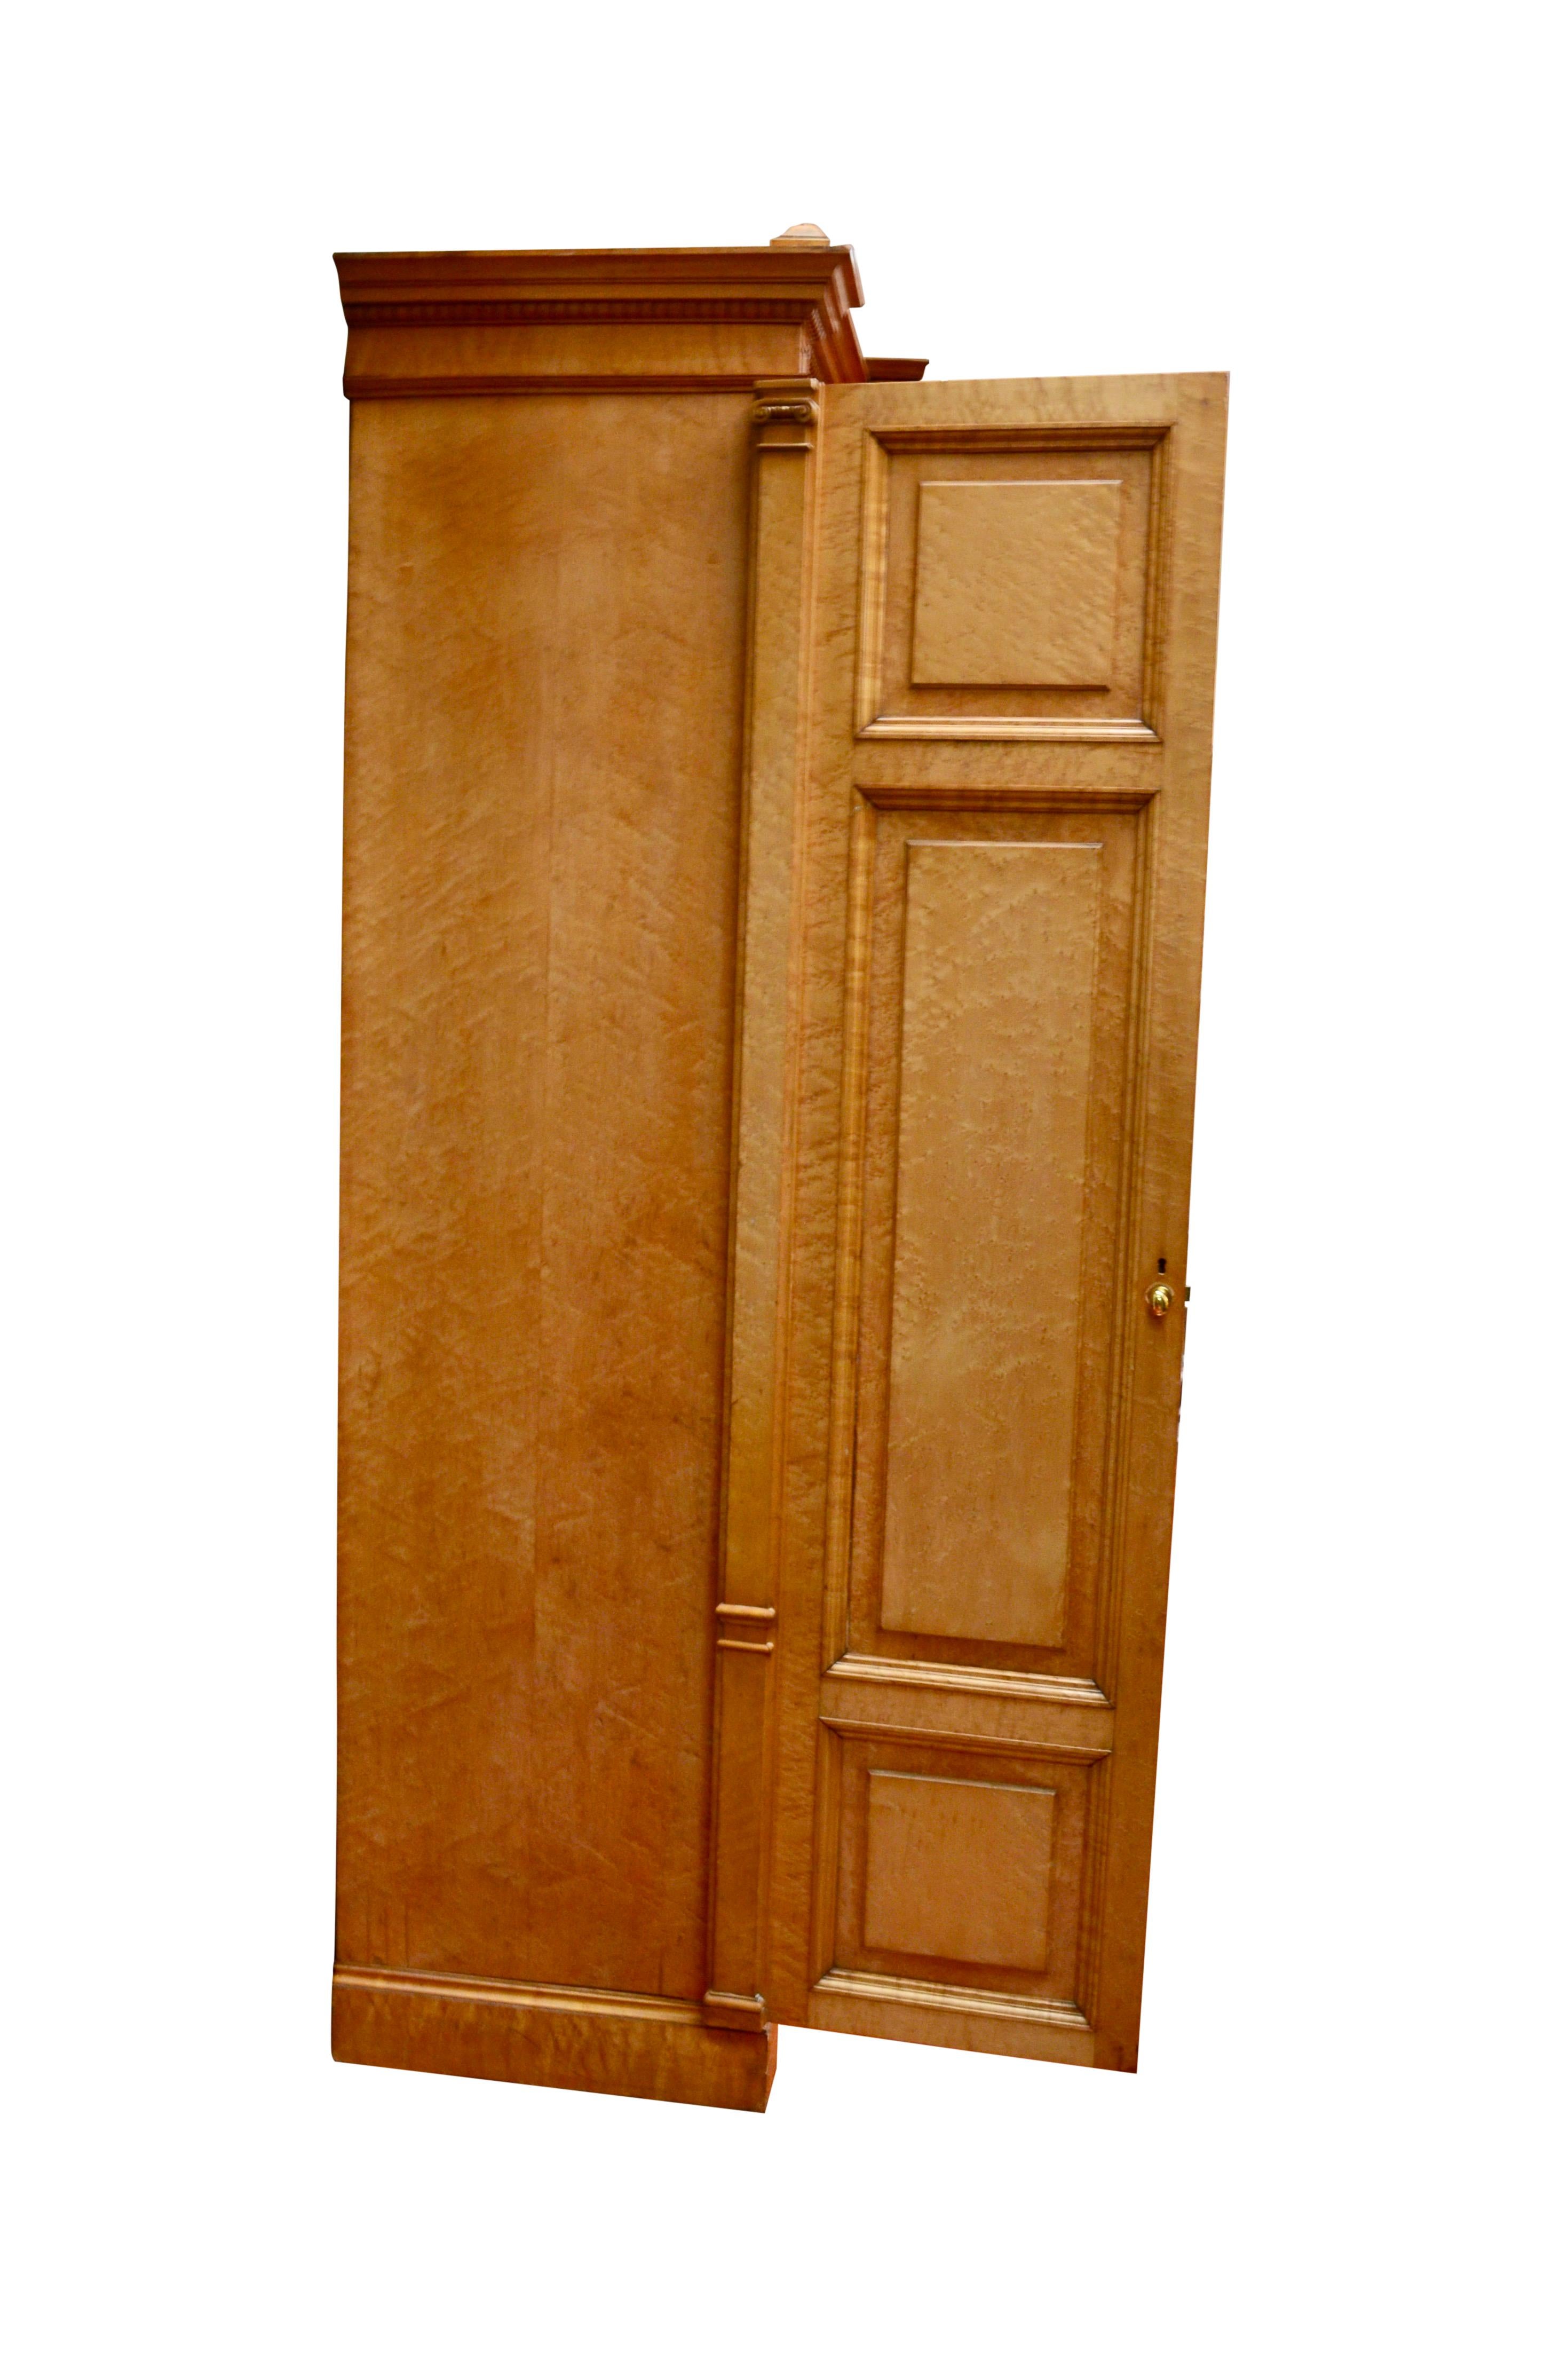 19th Century American Neoclassical Style Bird's-Eye Maple Armoire For Sale 6